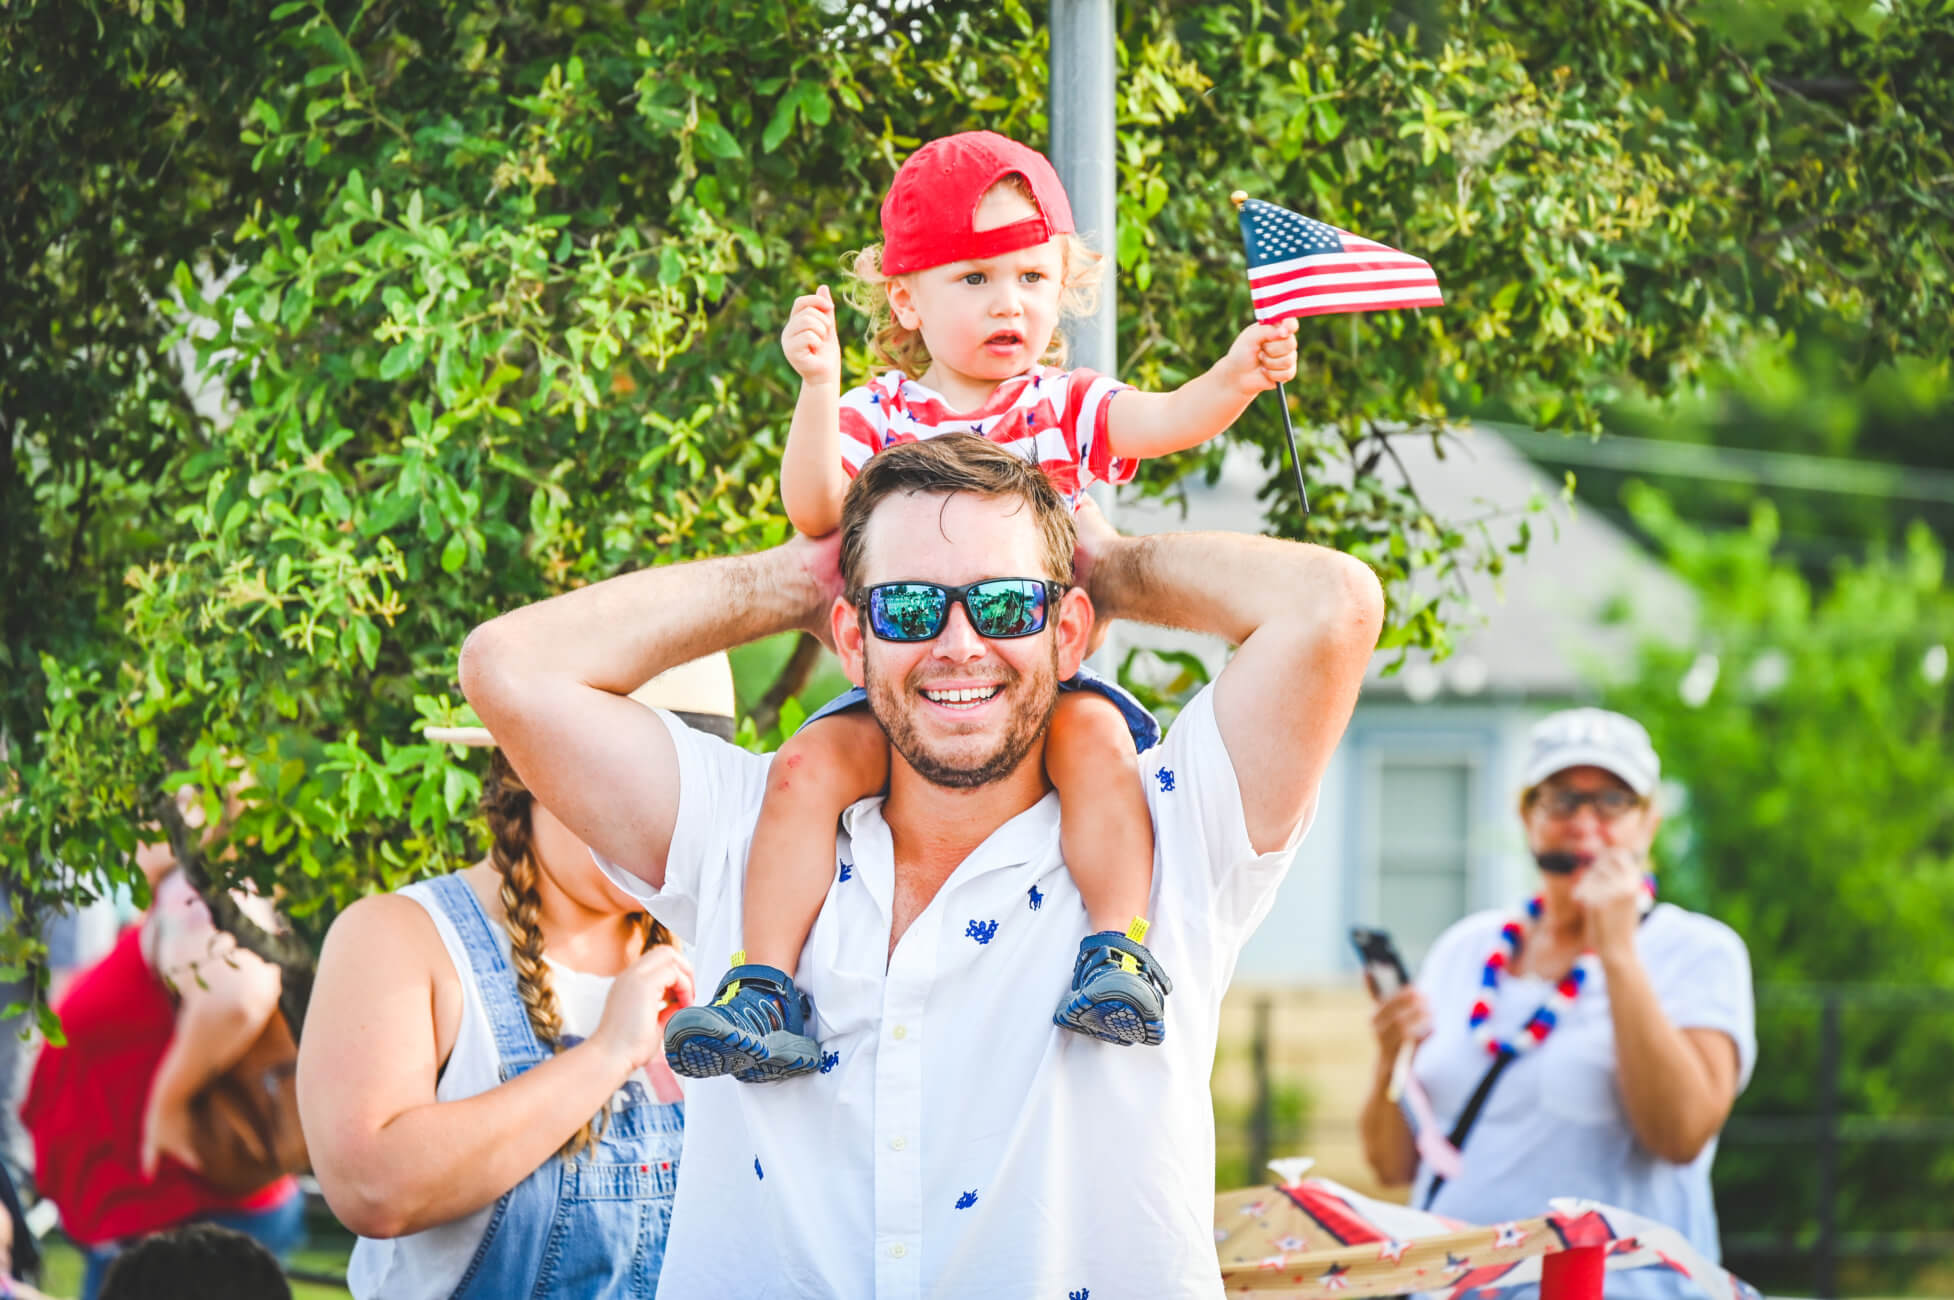 A smiling man with sunglasses and a white shirt gives his young child a piggyback ride. The child waves a small American flag. 